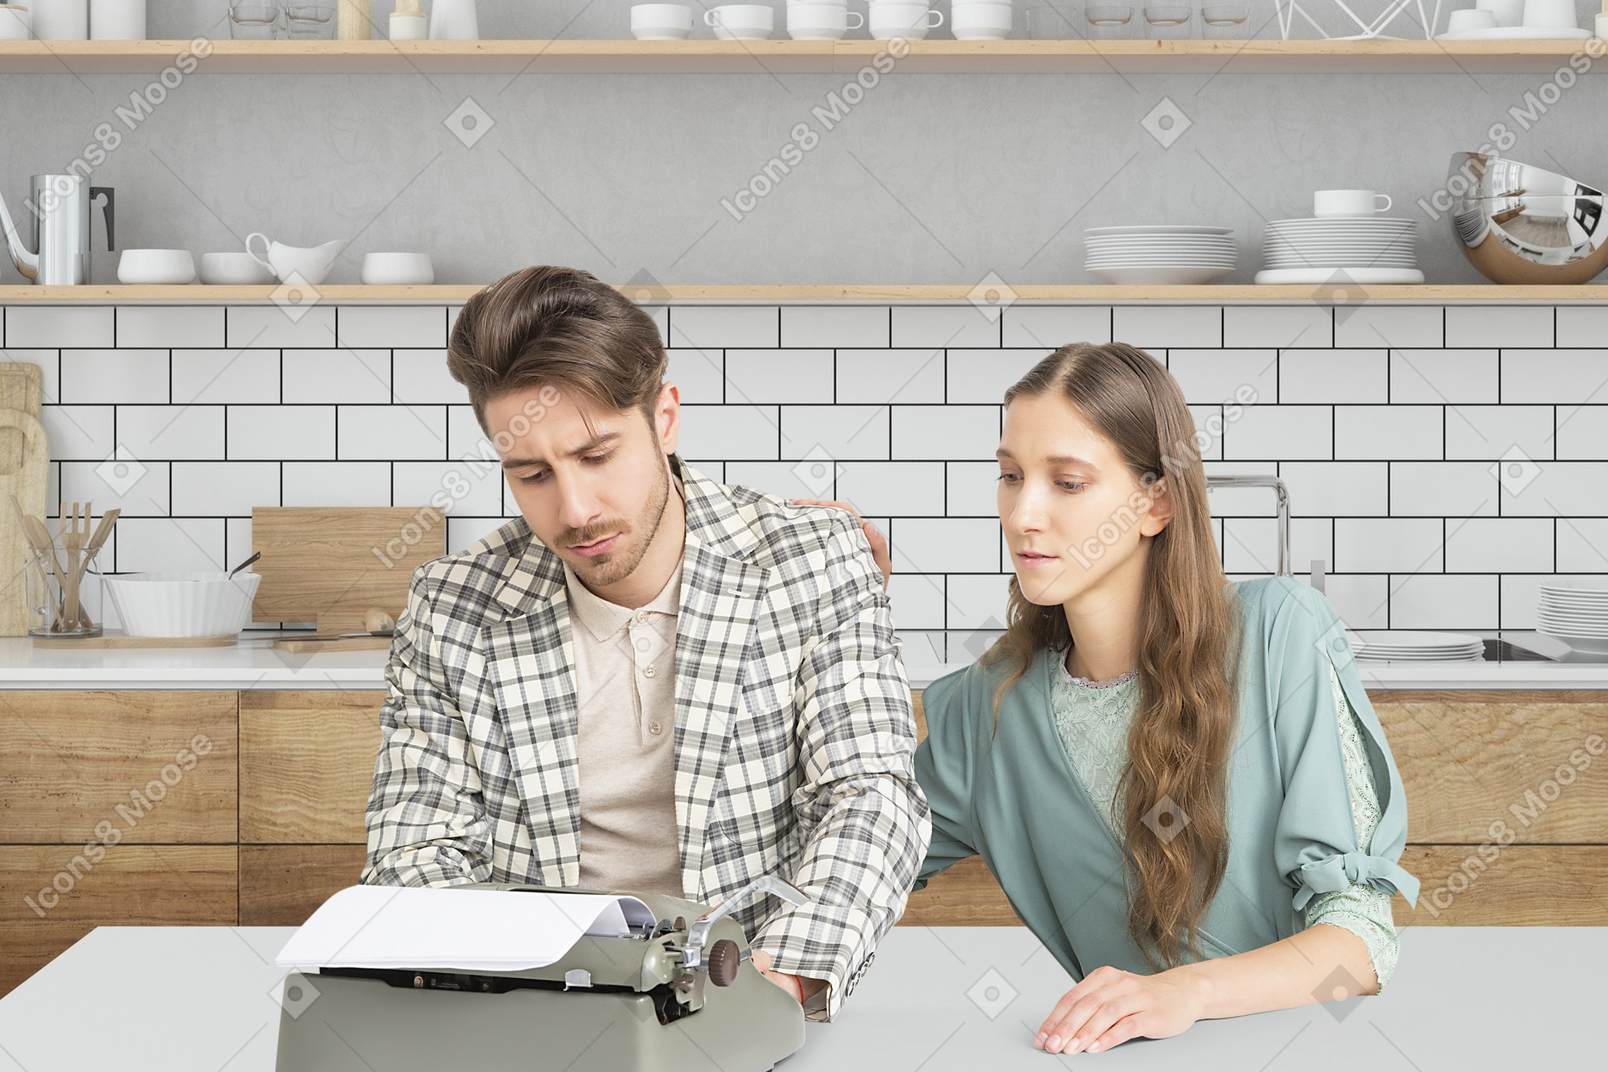 A man and woman sitting at a table looking at a typewriter